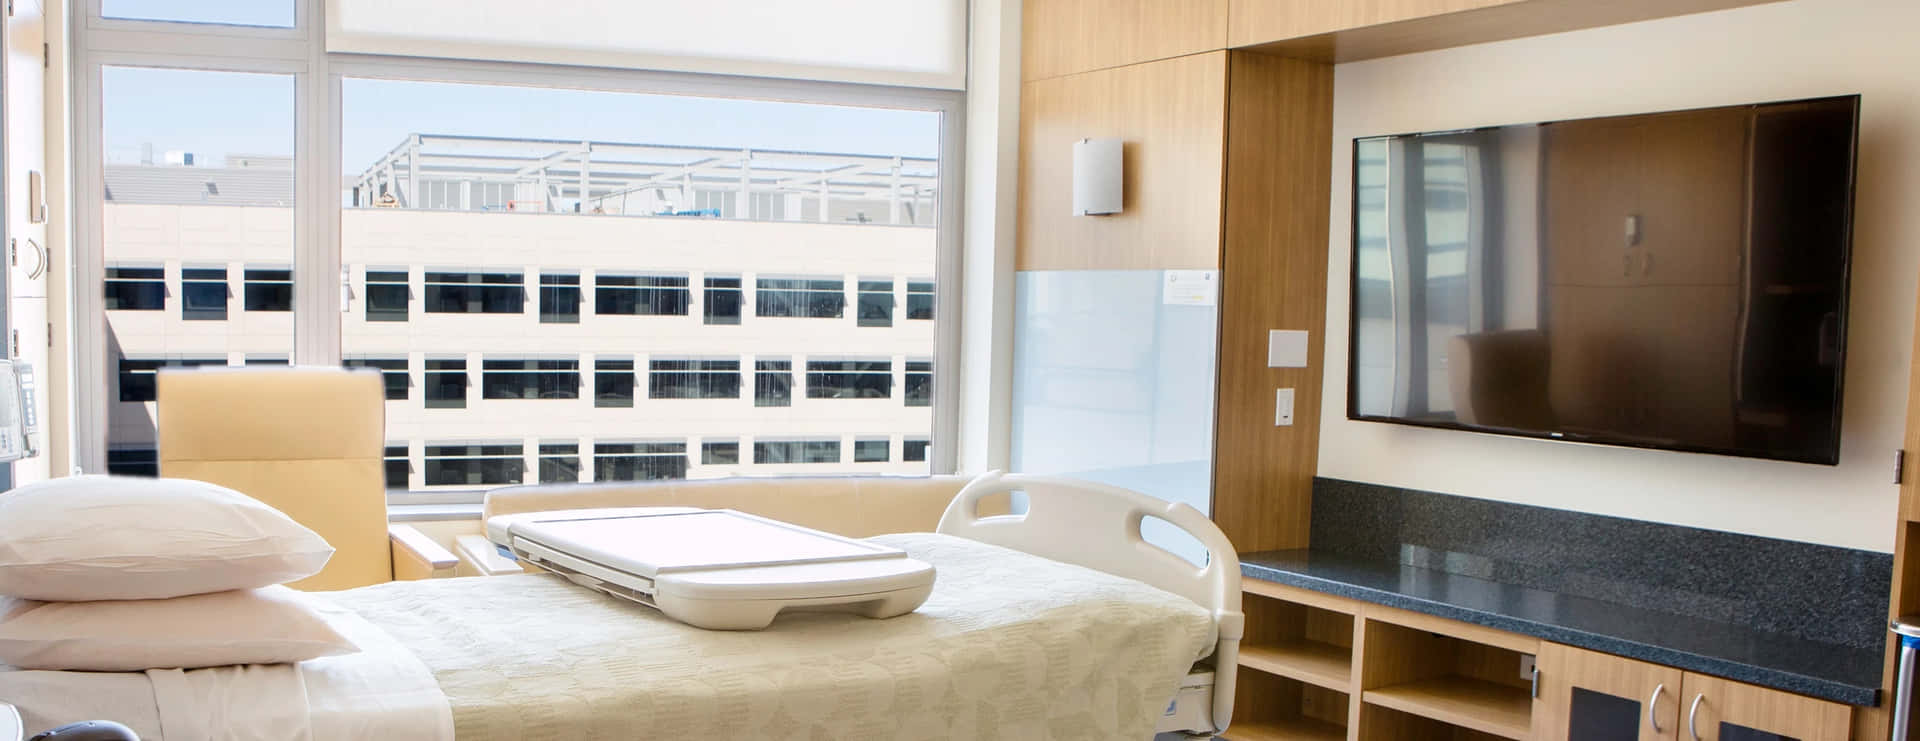 A Hospital Room With A Bed And A Television